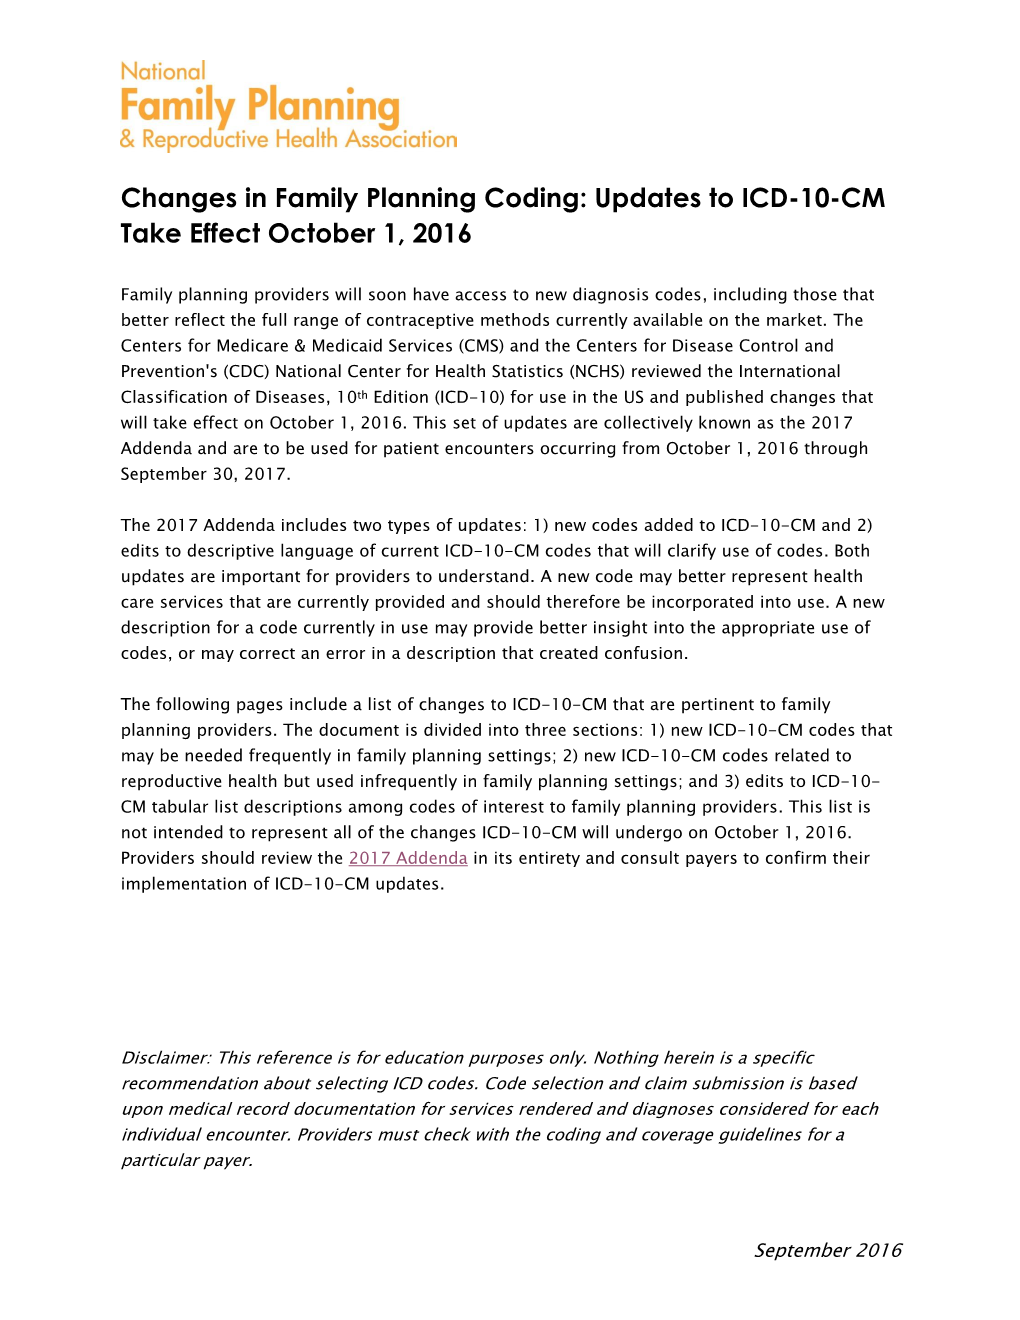 Updates to ICD-10-CM Take Effect October 1, 2016